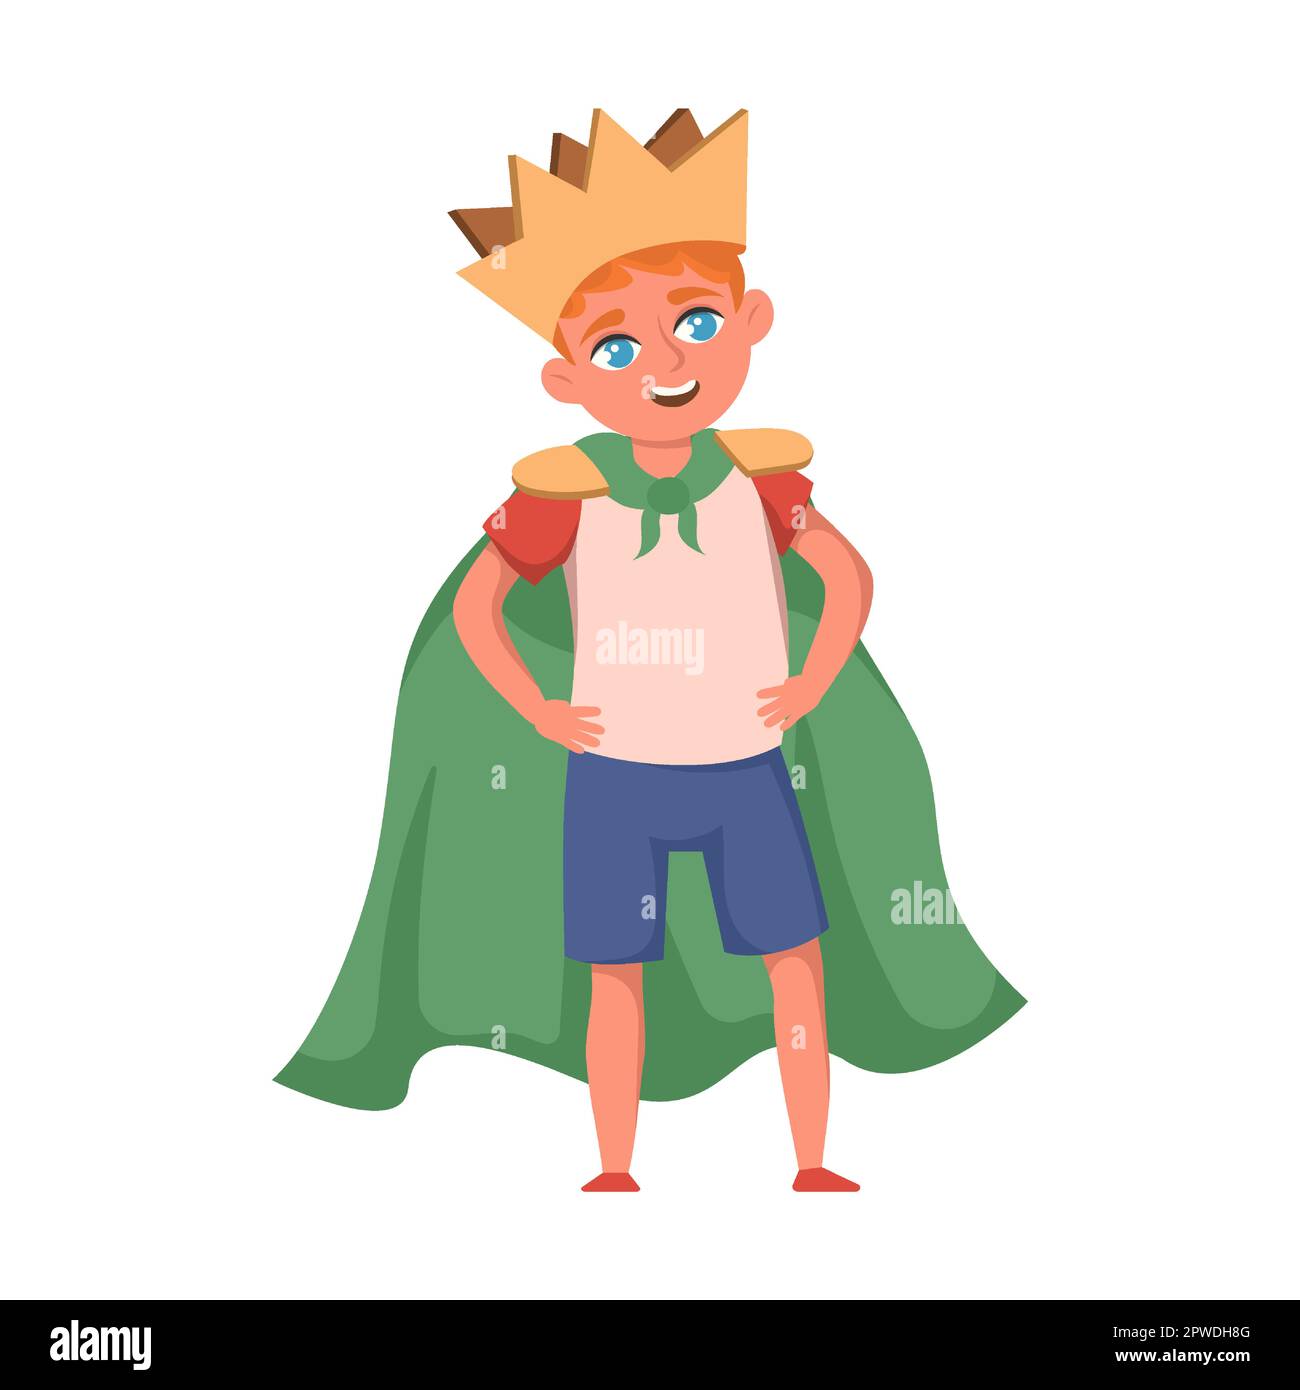 Kid with costume merry king from cardboard boxe vector illustration. Creative cartoon child in cardboard boat isolated on white background Stock Vector